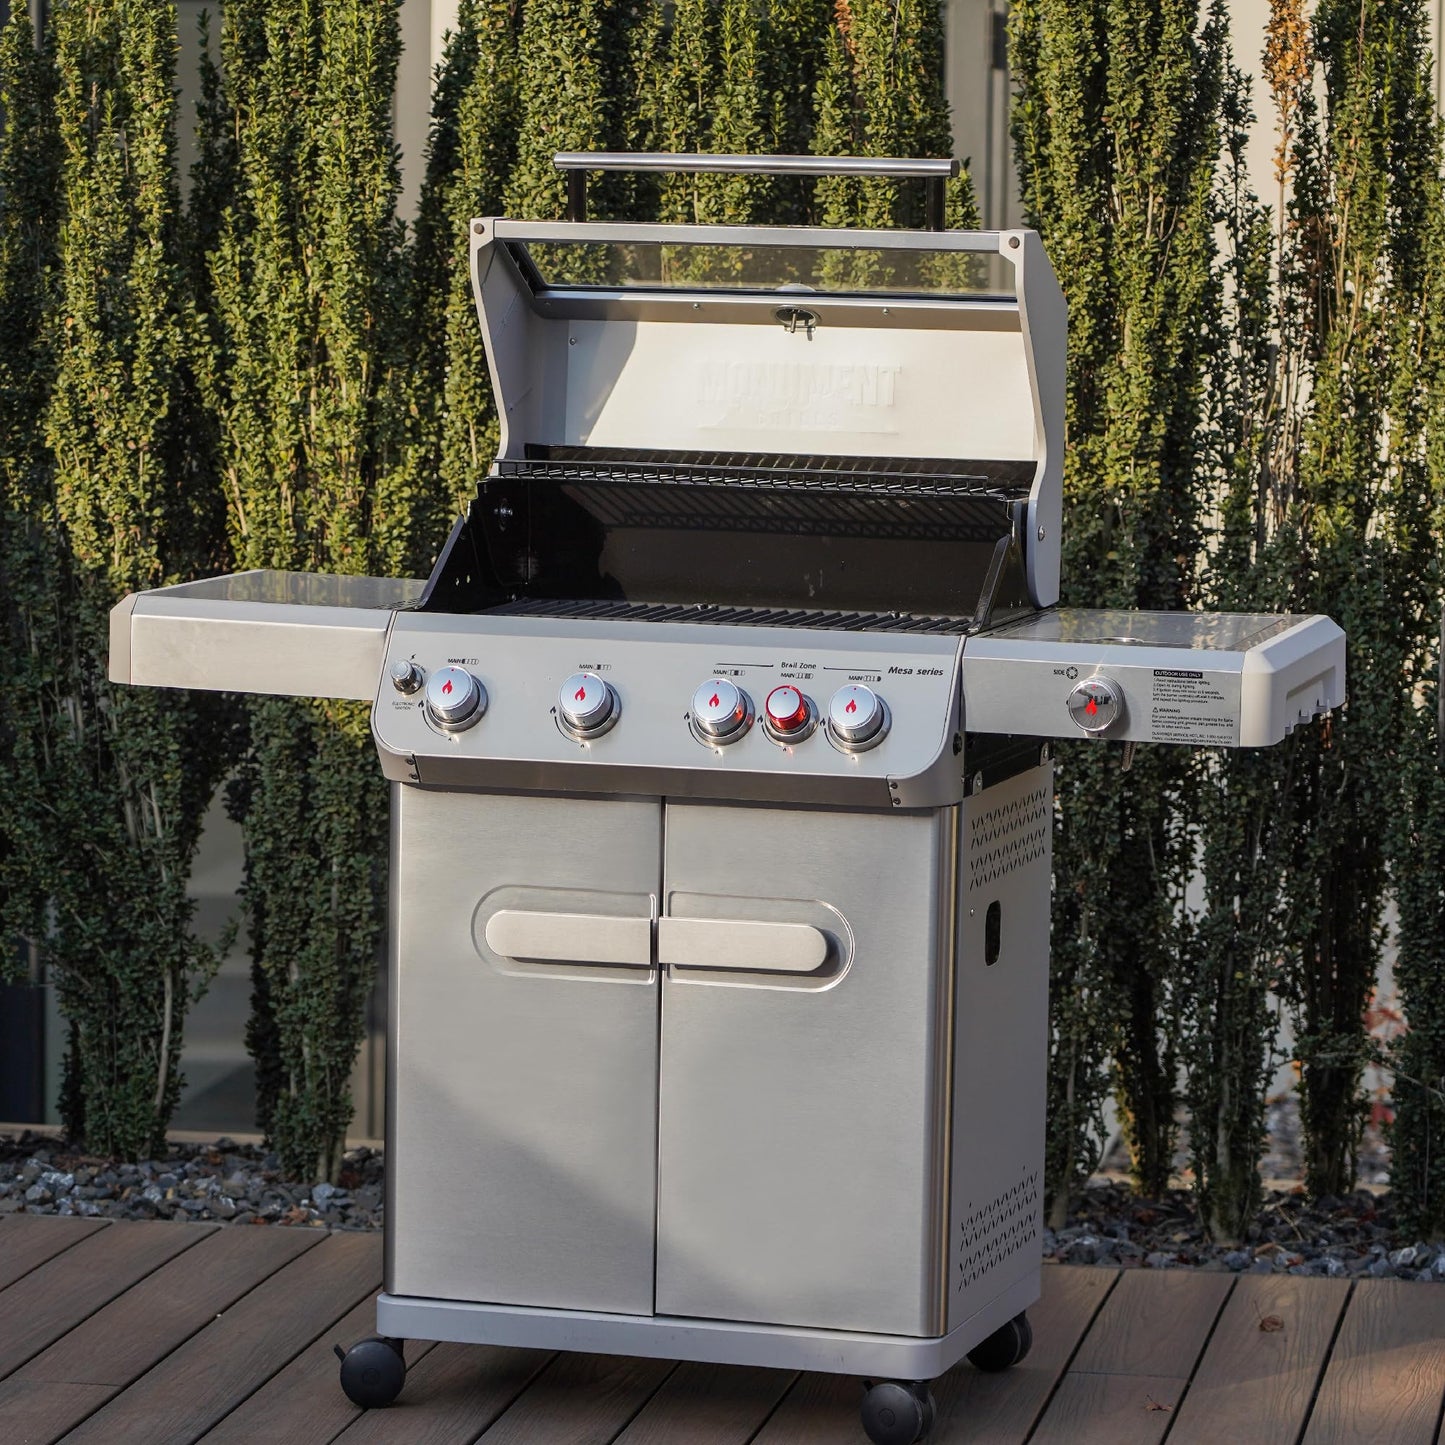 Monument Grills Outdoor Barbecue Stainless Steel 4 Burner Propane Gas Grill, 62,000 BTU Patio Garden Barbecue Grill with Side Burner and LED Controls, Mesa415BZ